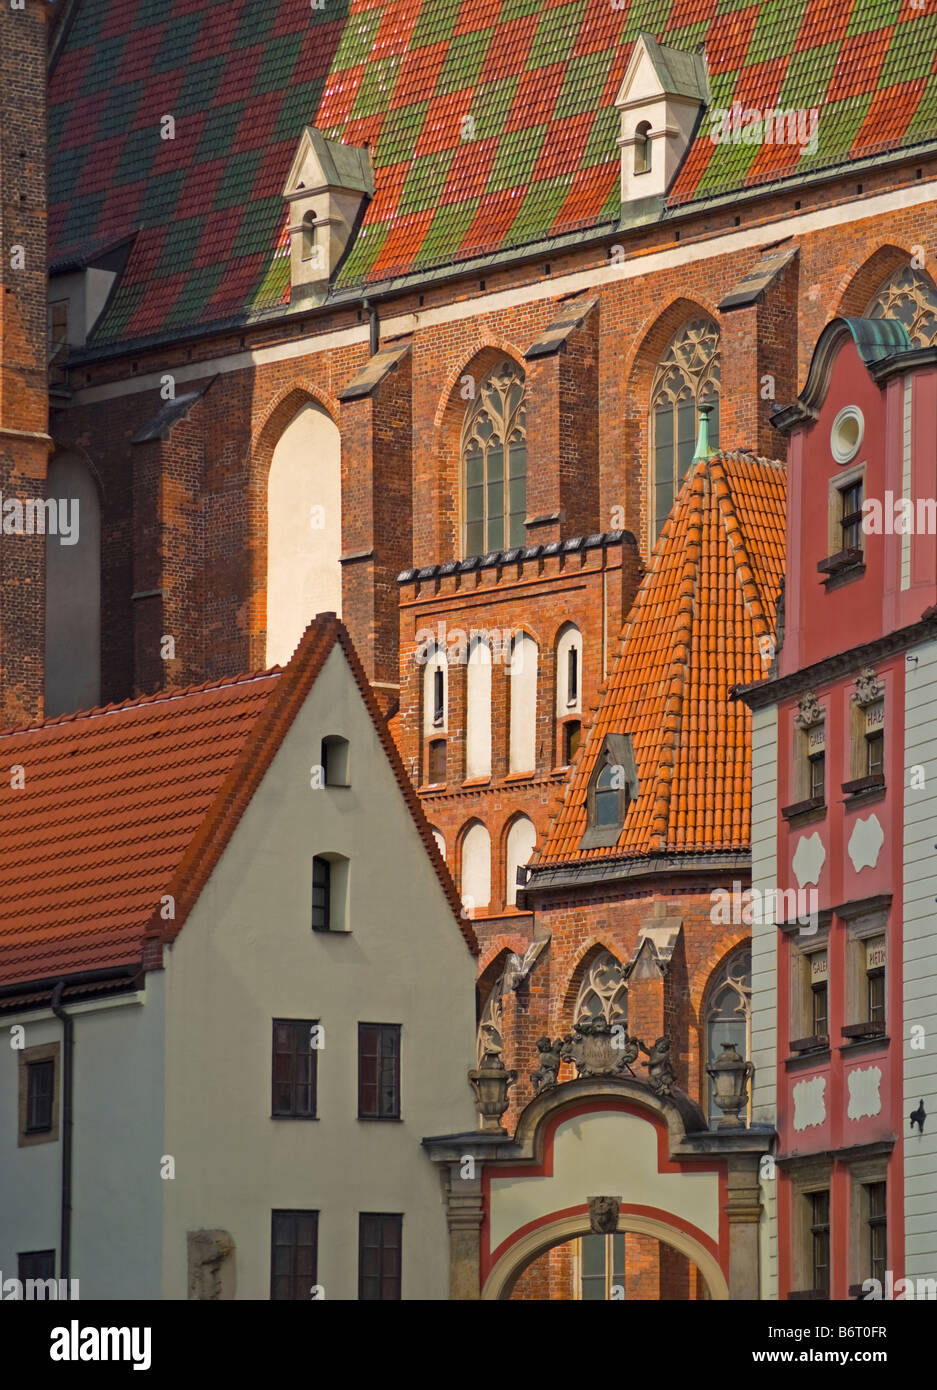 Wroclaw, Silesia, Poland. Church of St Elizabeth and the 'Jonney and Mary' houses seen from the Rynek (Market Square) Stock Photo